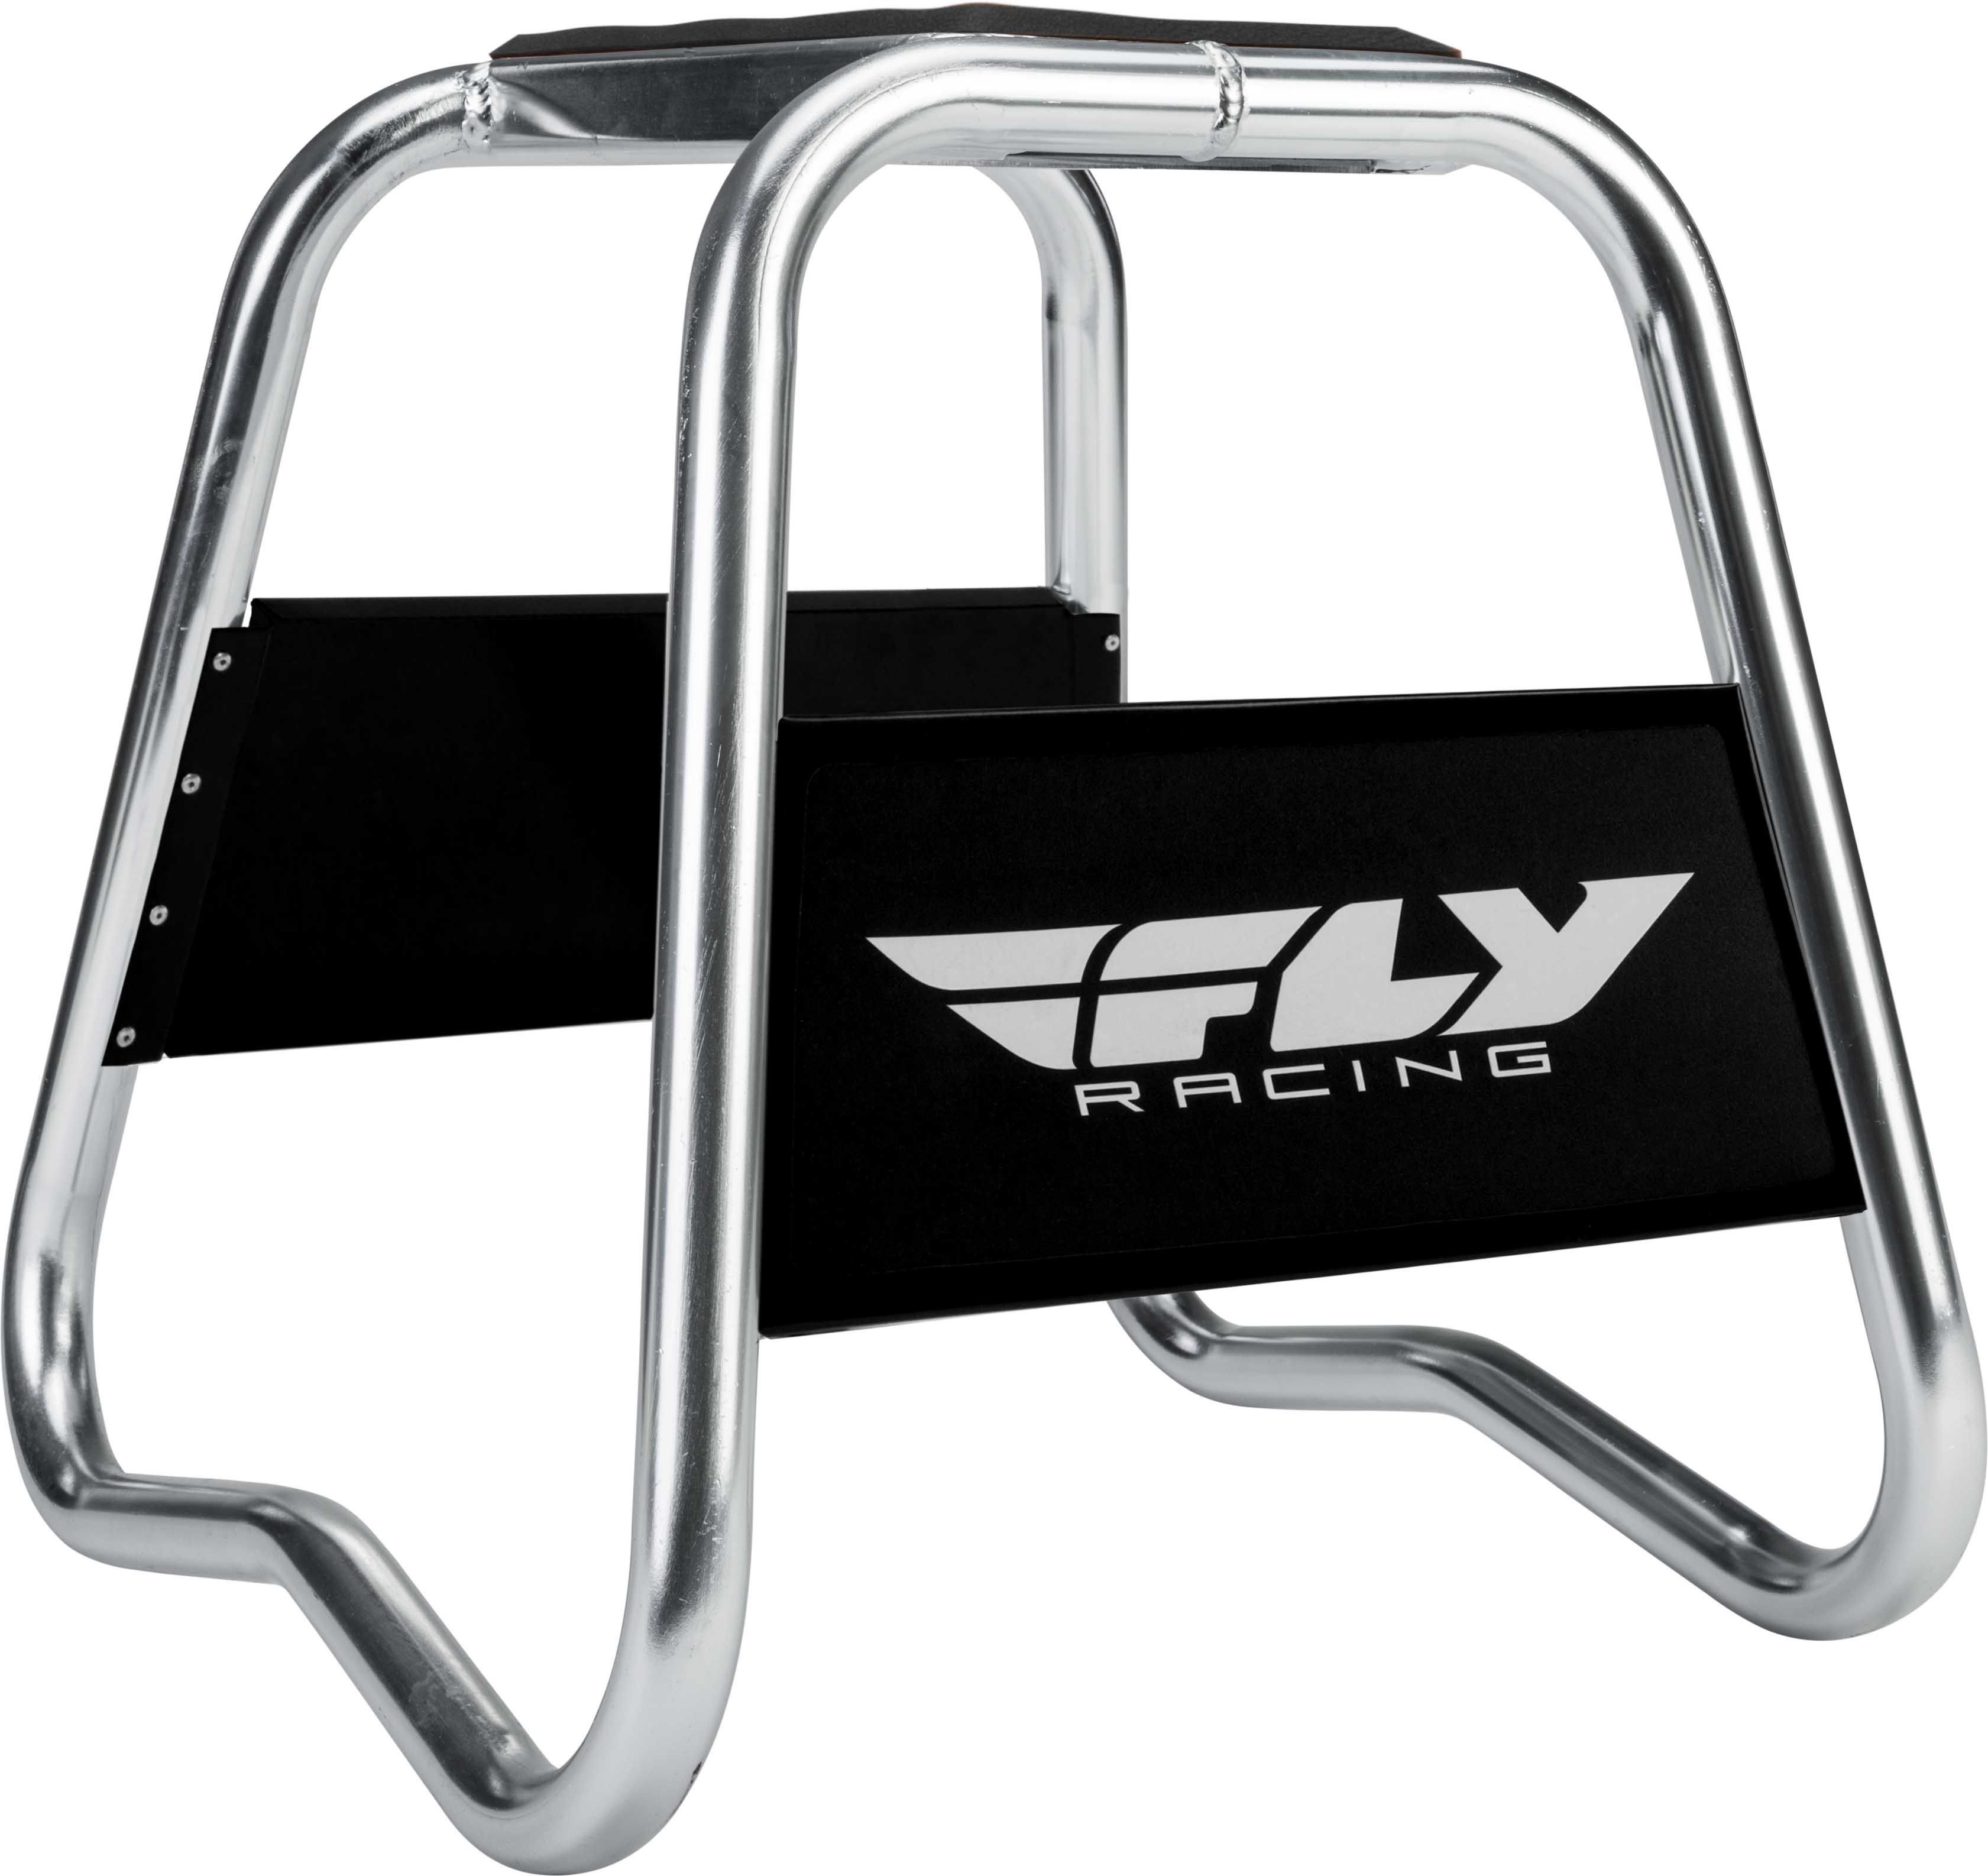 Main image of Fly Racing Podium Stand